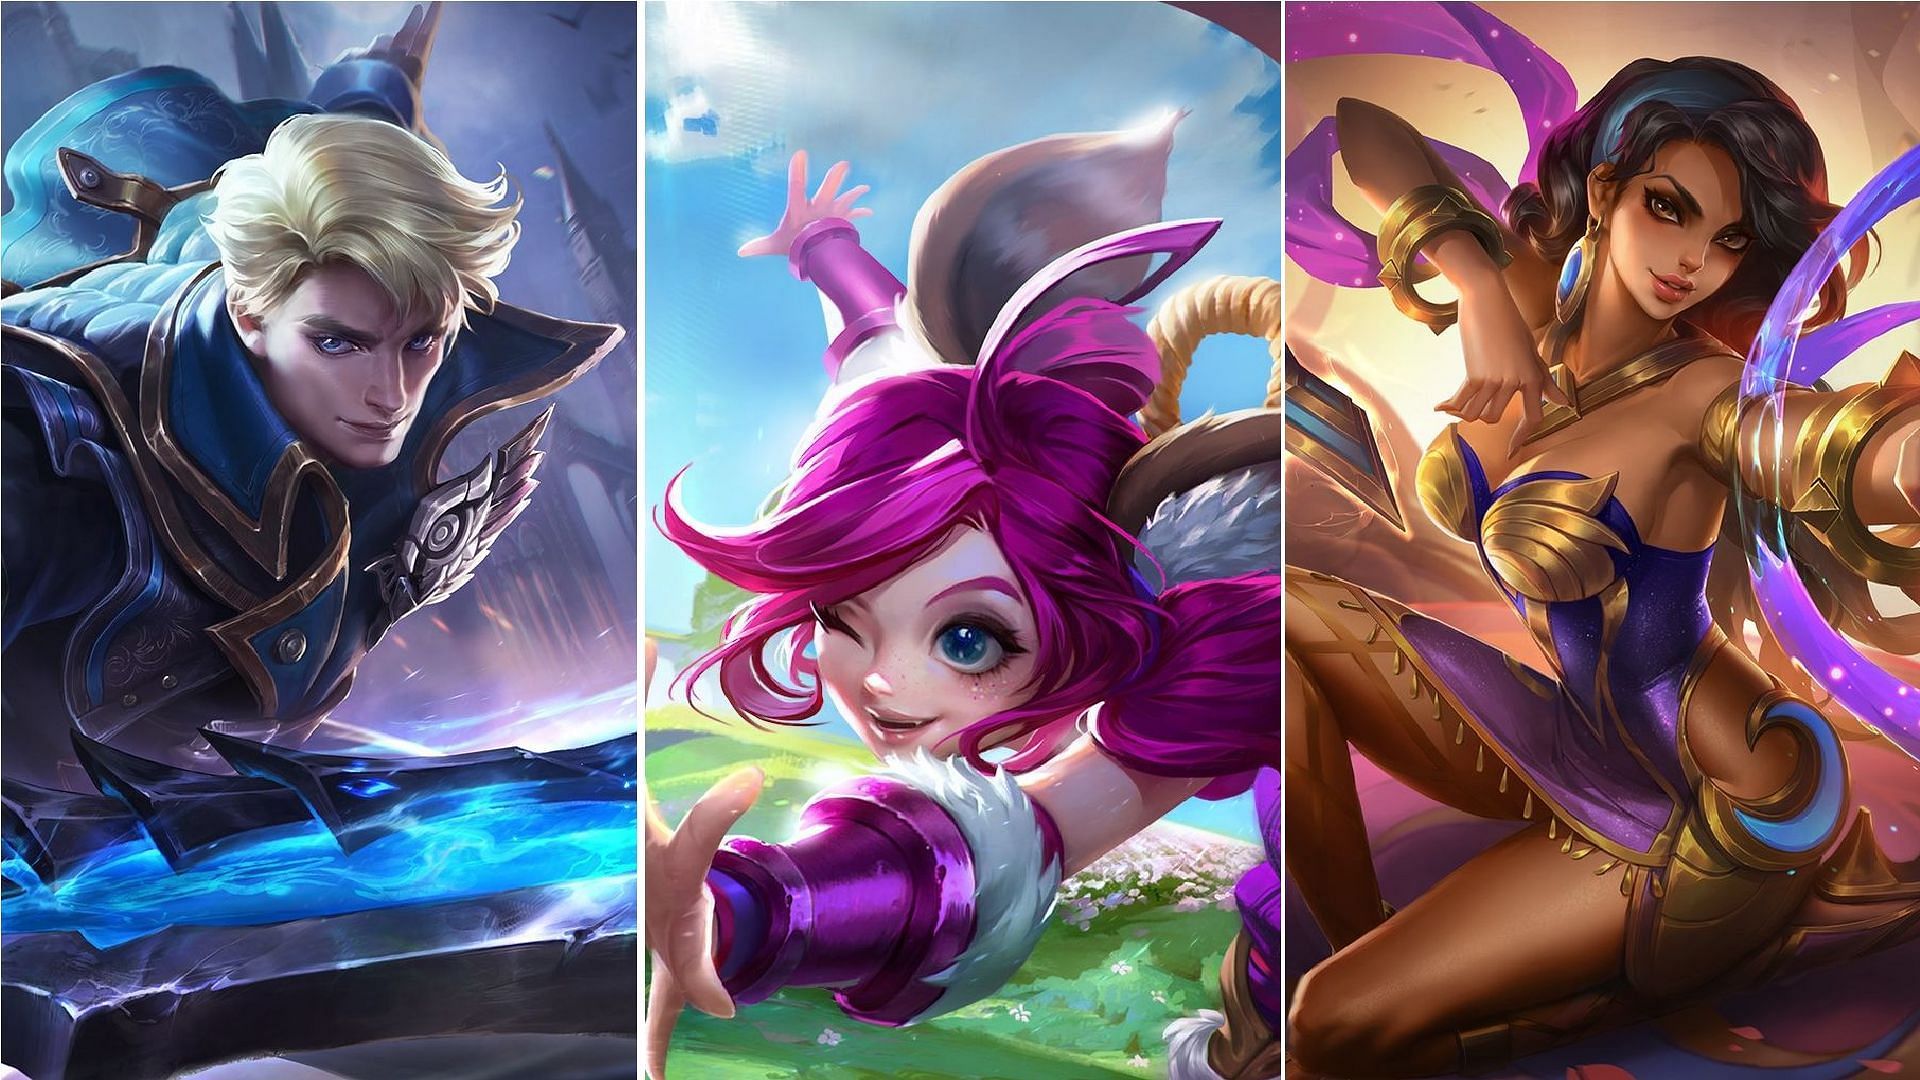 Alucard, Nana, and Esmeralda might receive some changes in the upcoming updates of Mobile Legends Bang Bang (Image via Moonton Games)